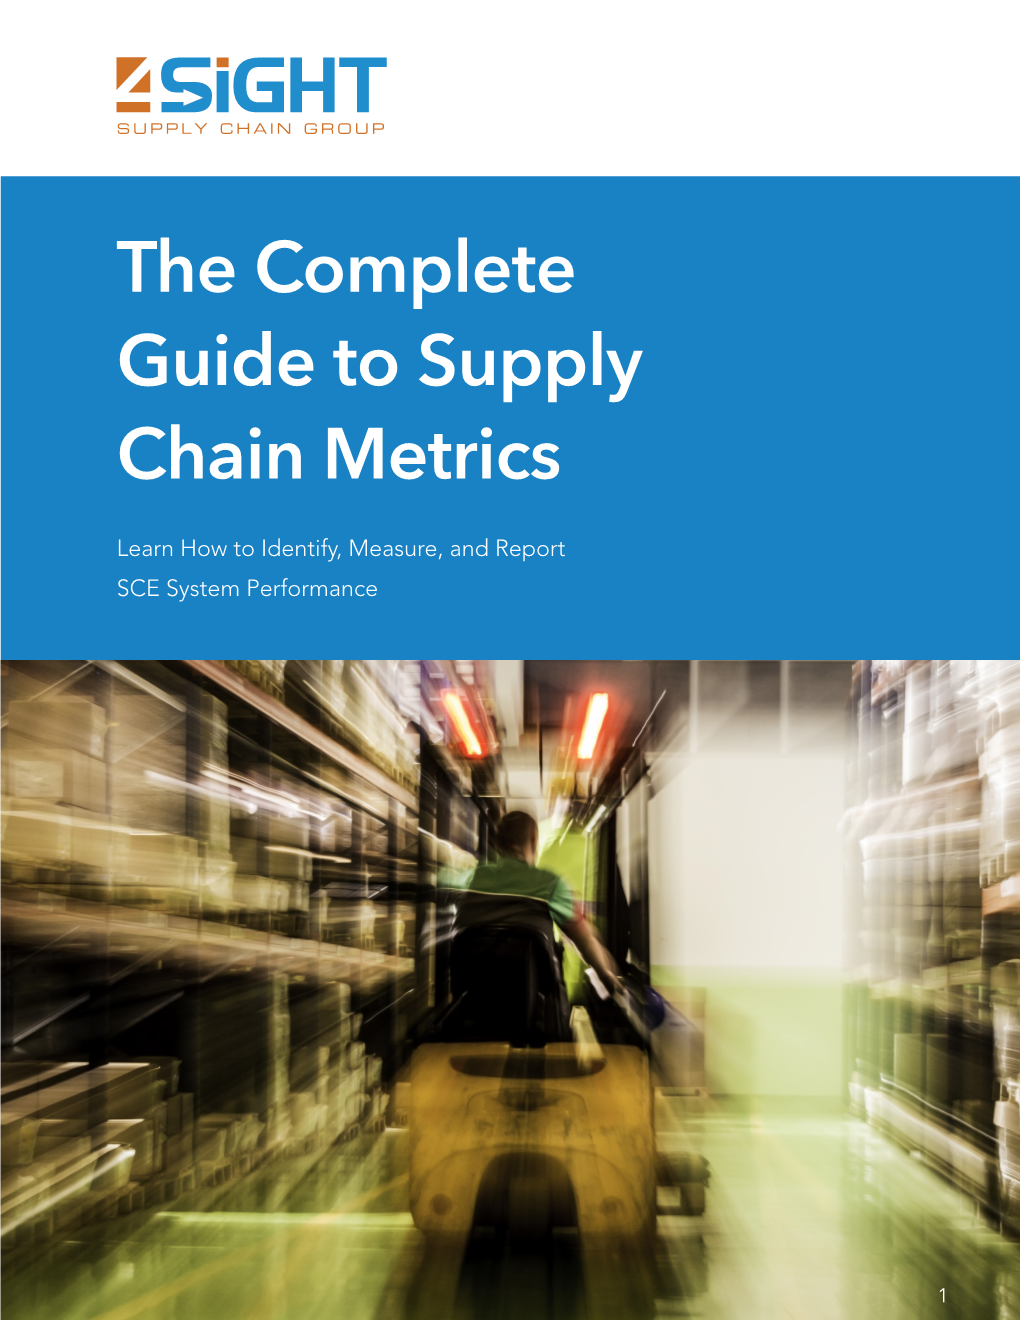 The Complete Guide to Supply Chain Metrics